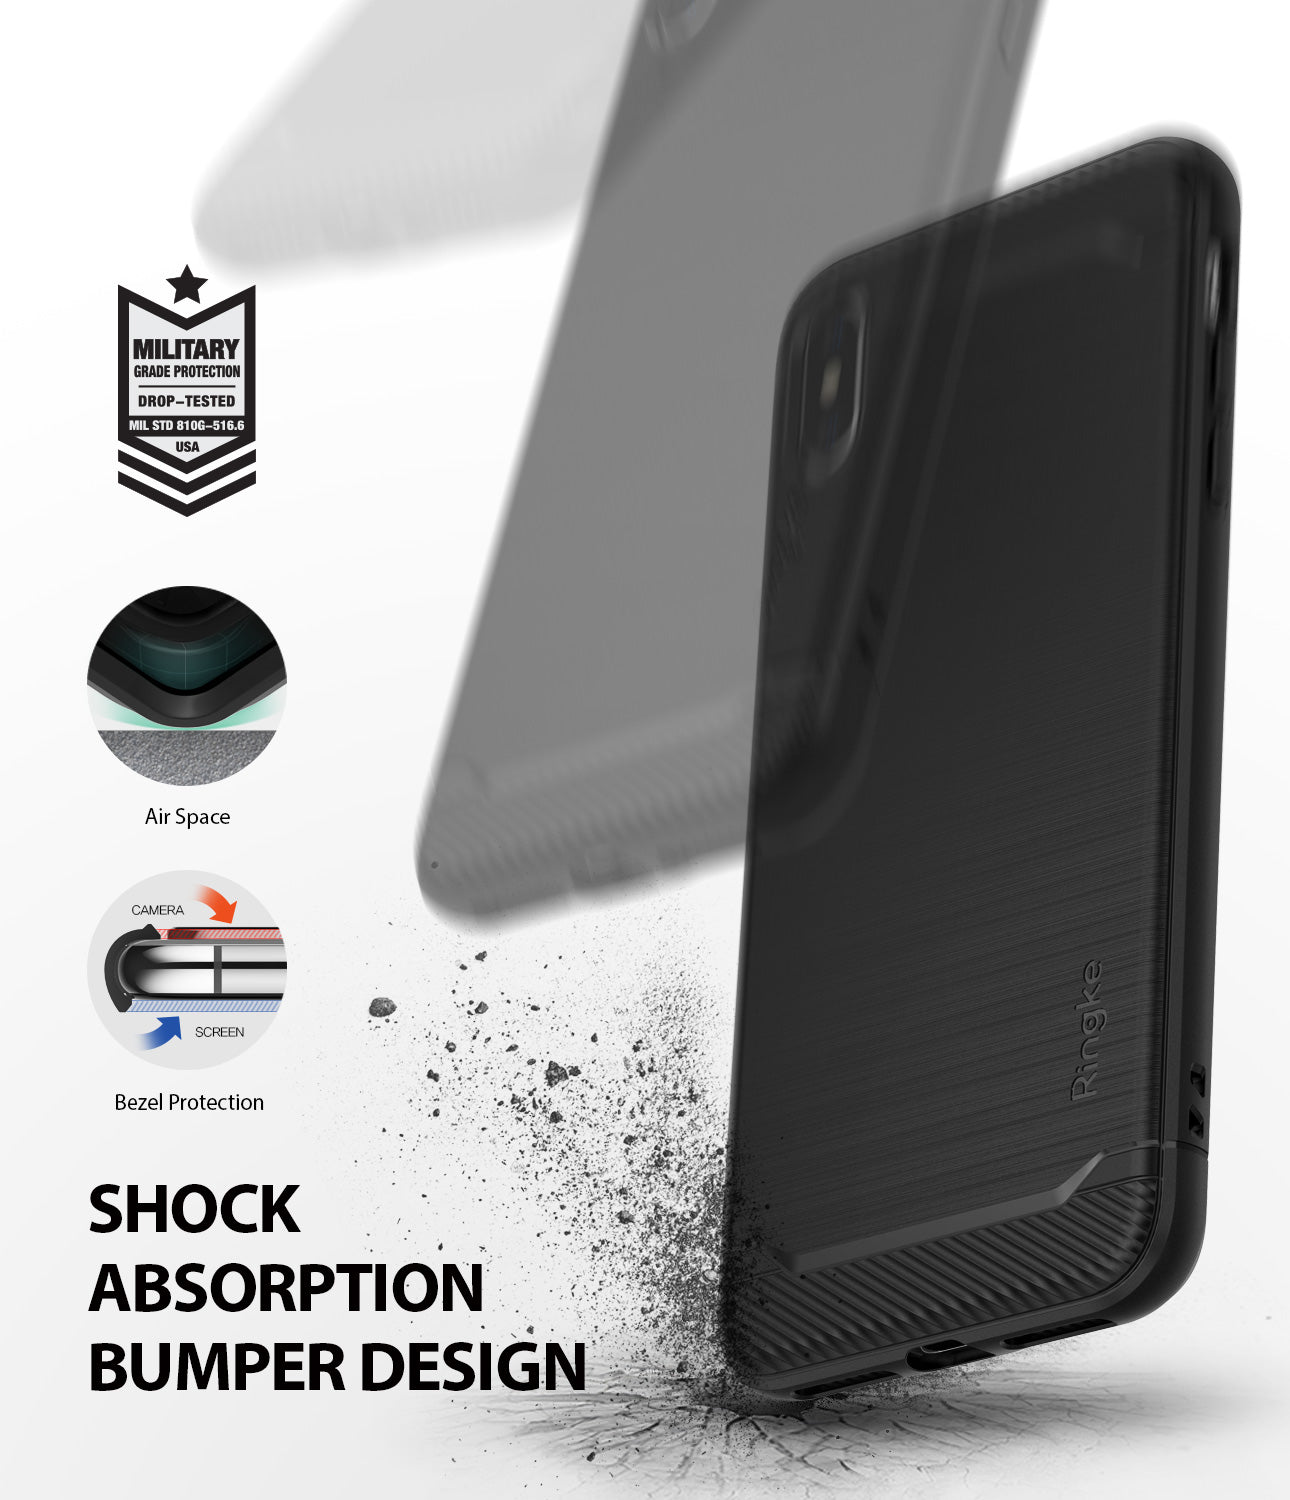 ringke onyx for apple iphone xs max case cover detail image